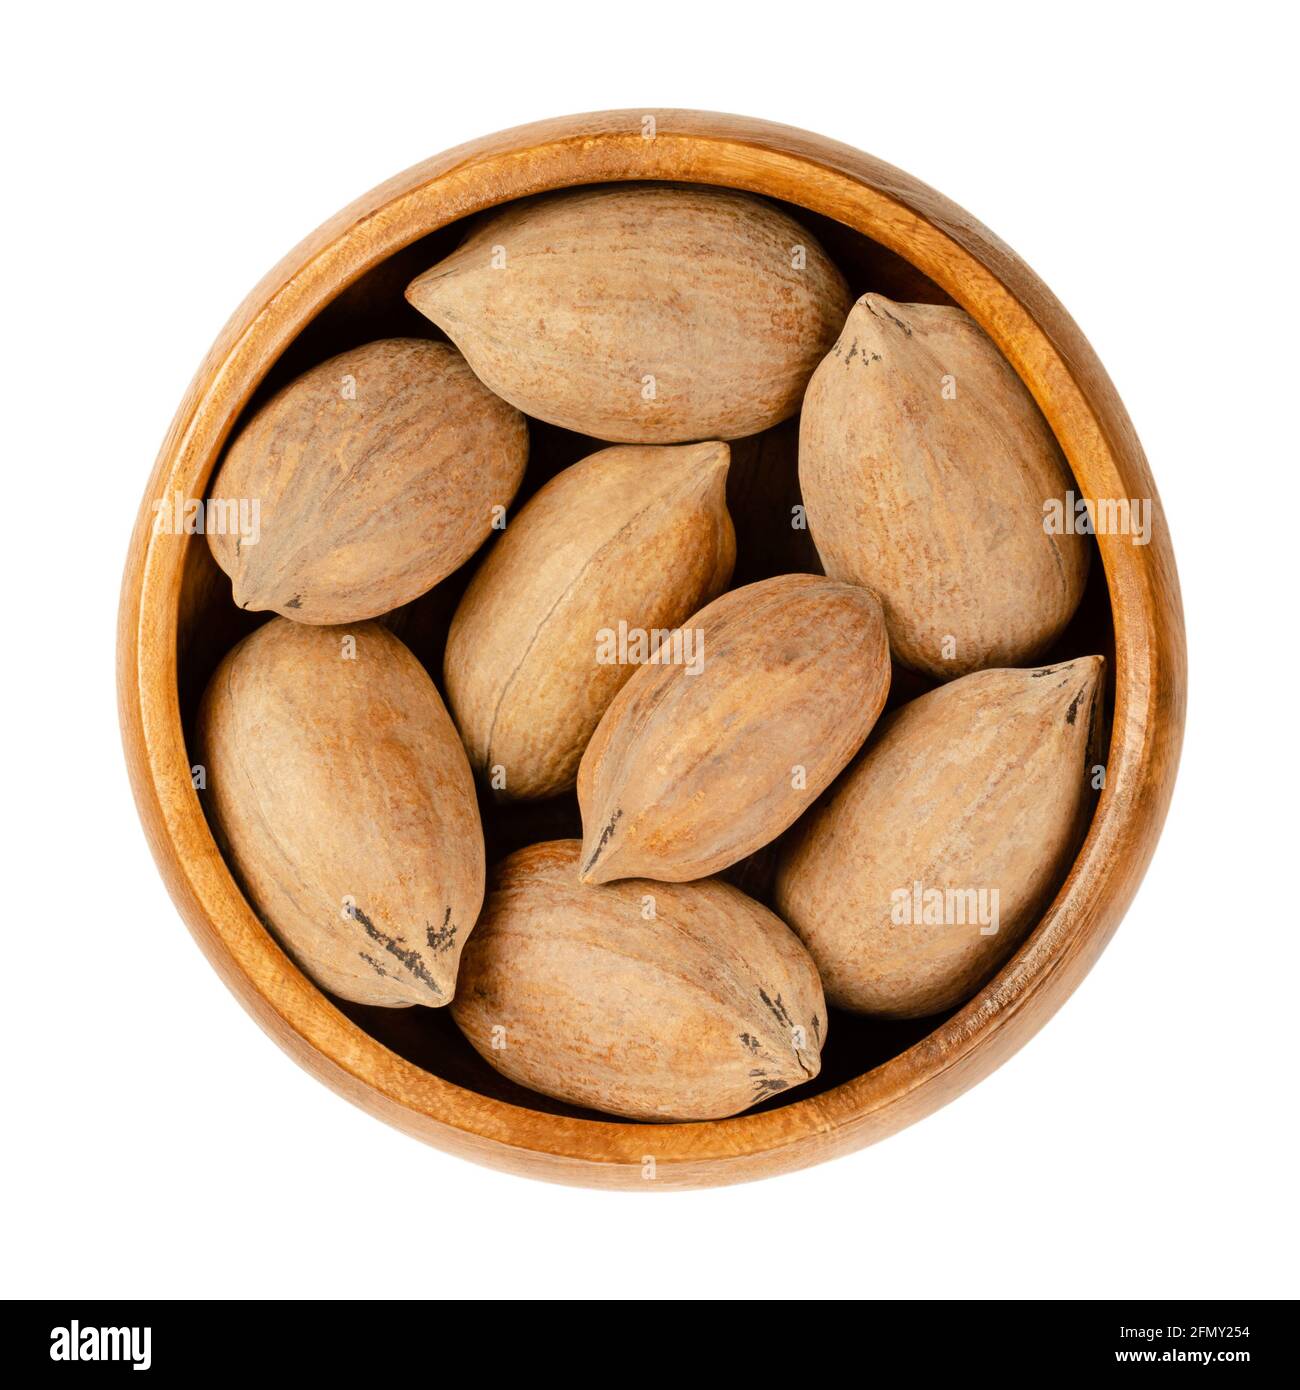 Unshelled pecan nuts, in a wooden bowl. Whole pecans, seeds and edible nuts of Carya illinoinensis. Used as a snack and in various recipes. Close-up. Stock Photo